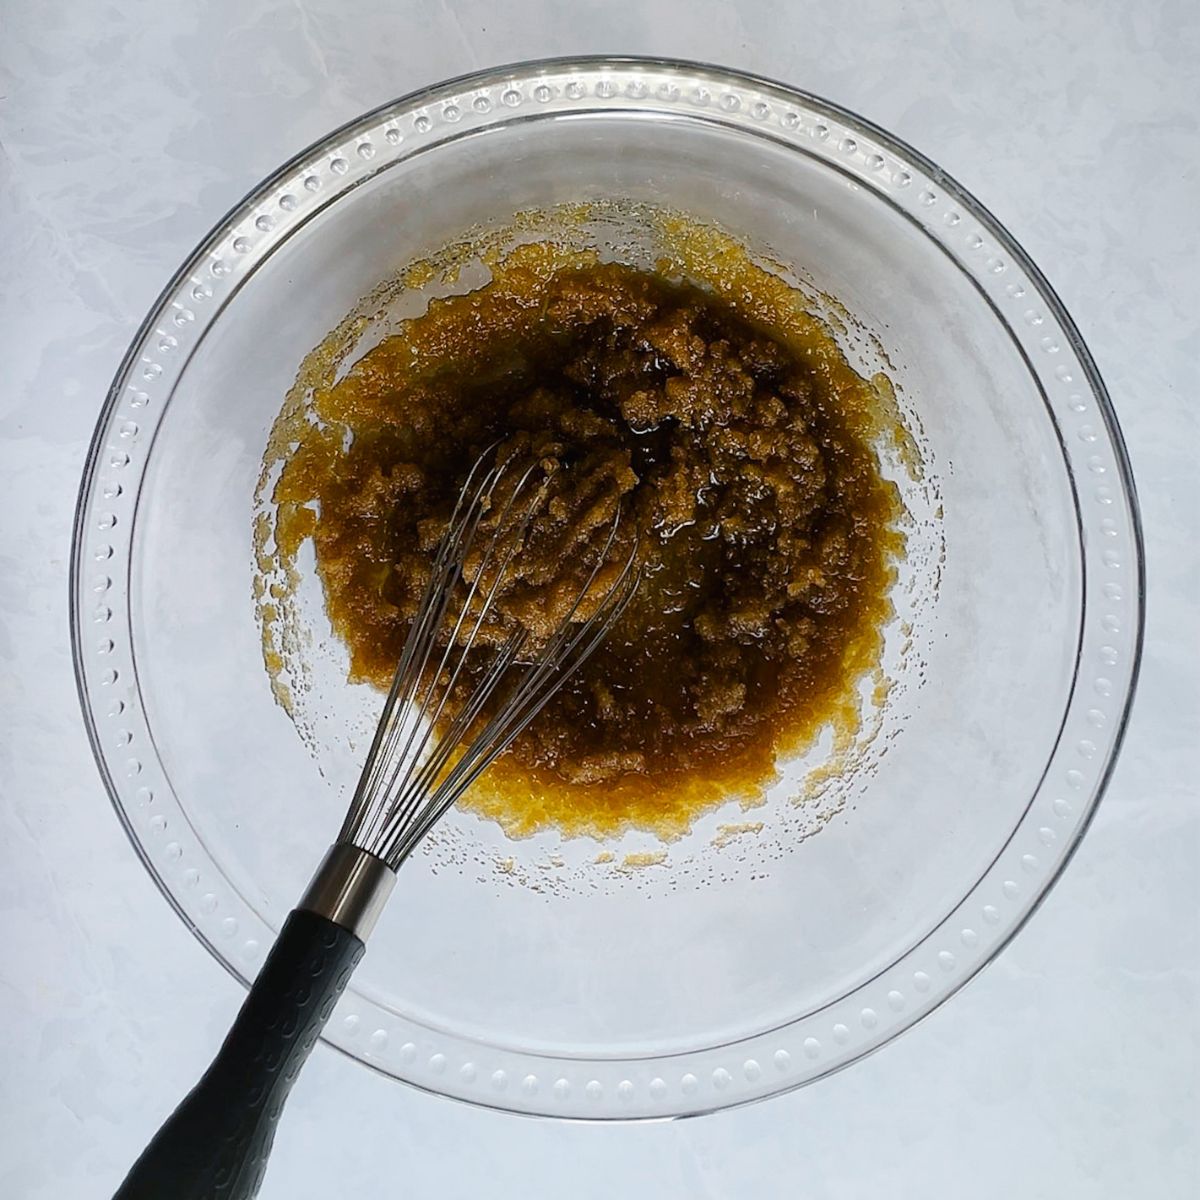 Olive oil and brown sugar in a mixing bowl with whisk.